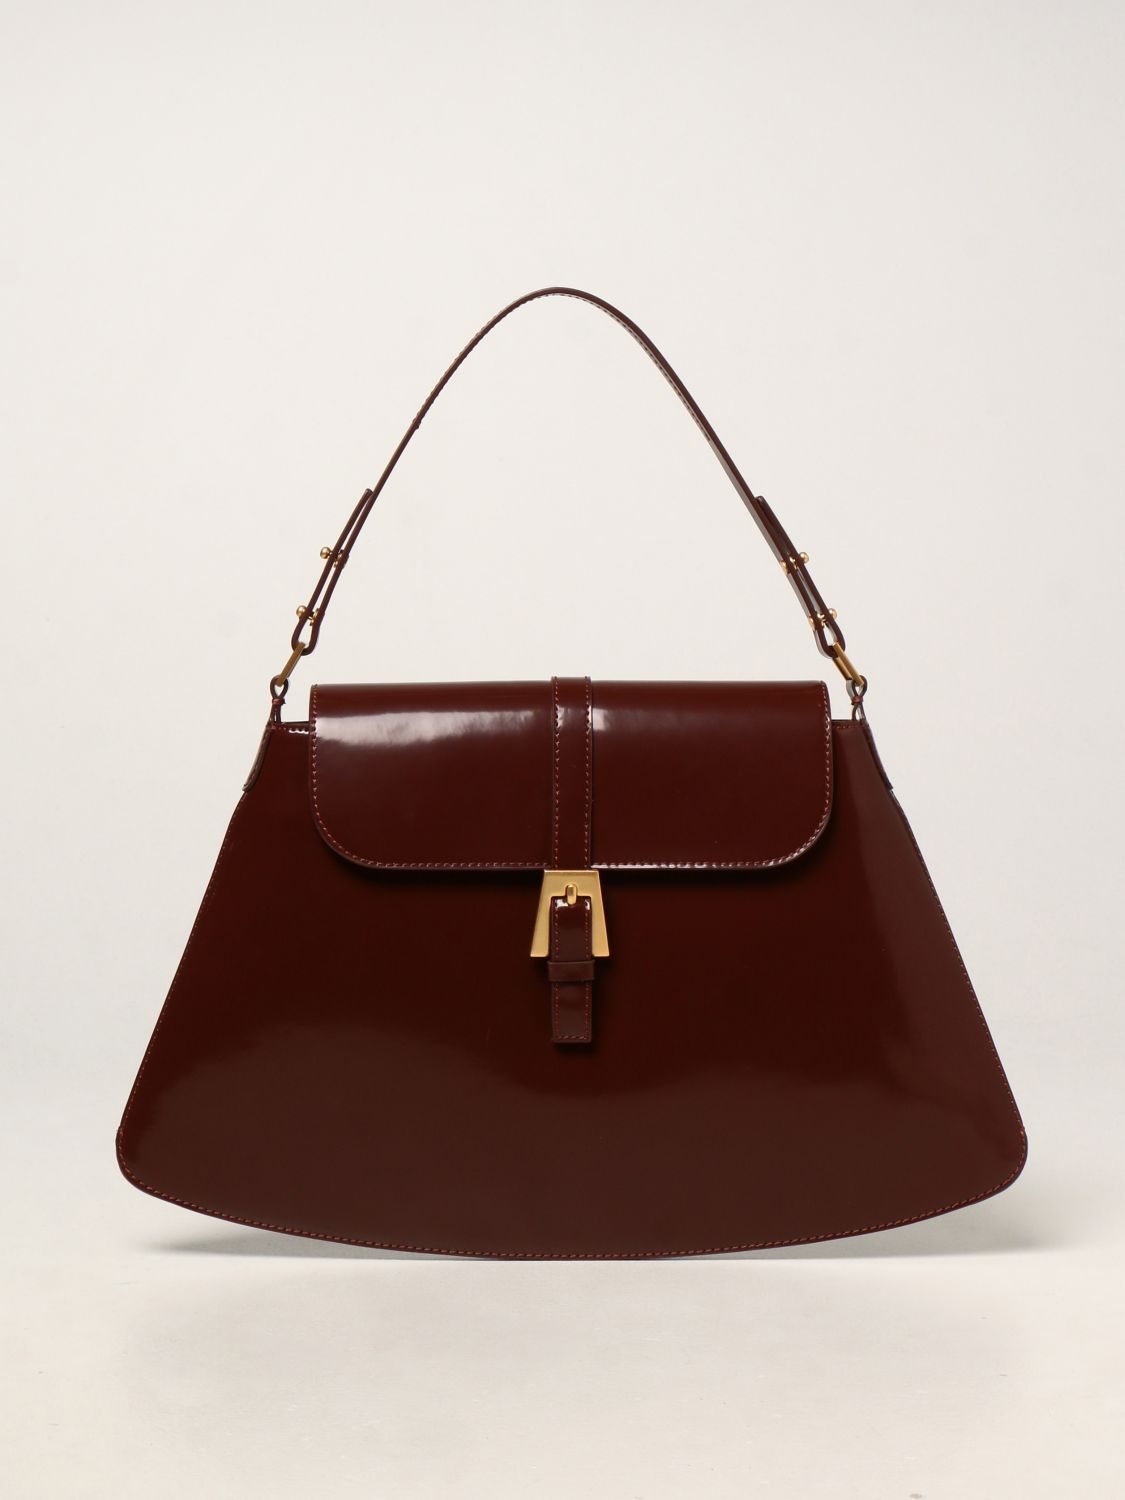 Handbag By Far: Portia By Far bag in brushed leather brown 1